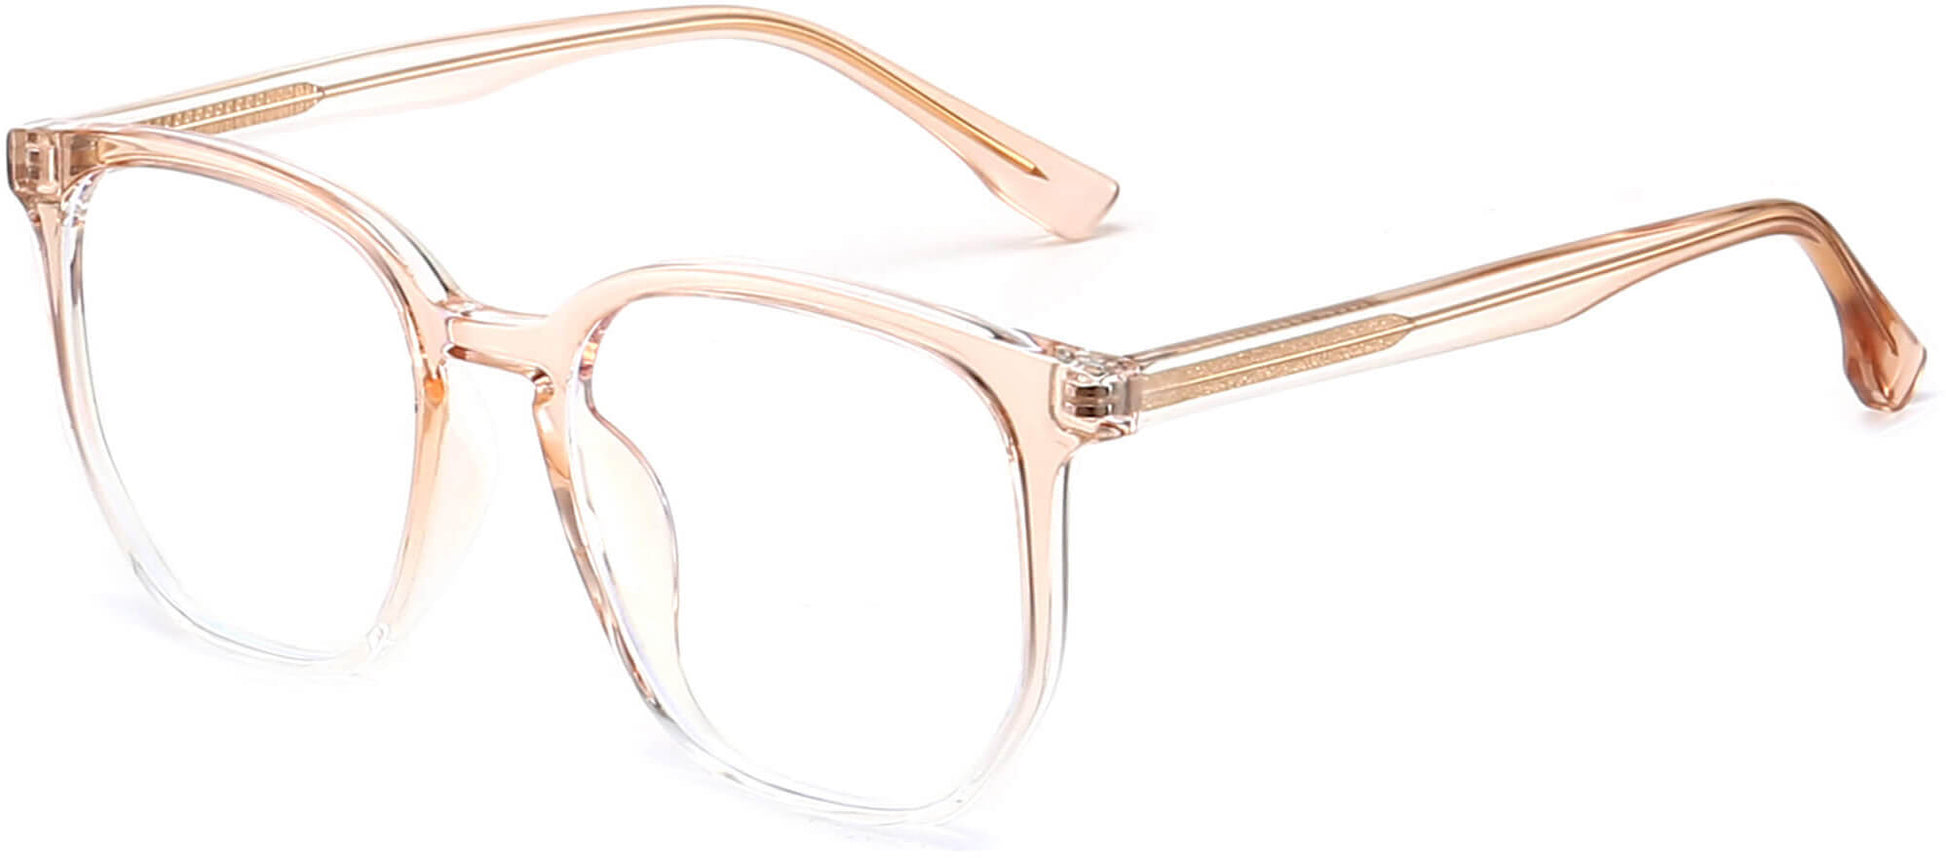 Dusty Rectangle Clear Eyeglasses from ANRRI, angle view